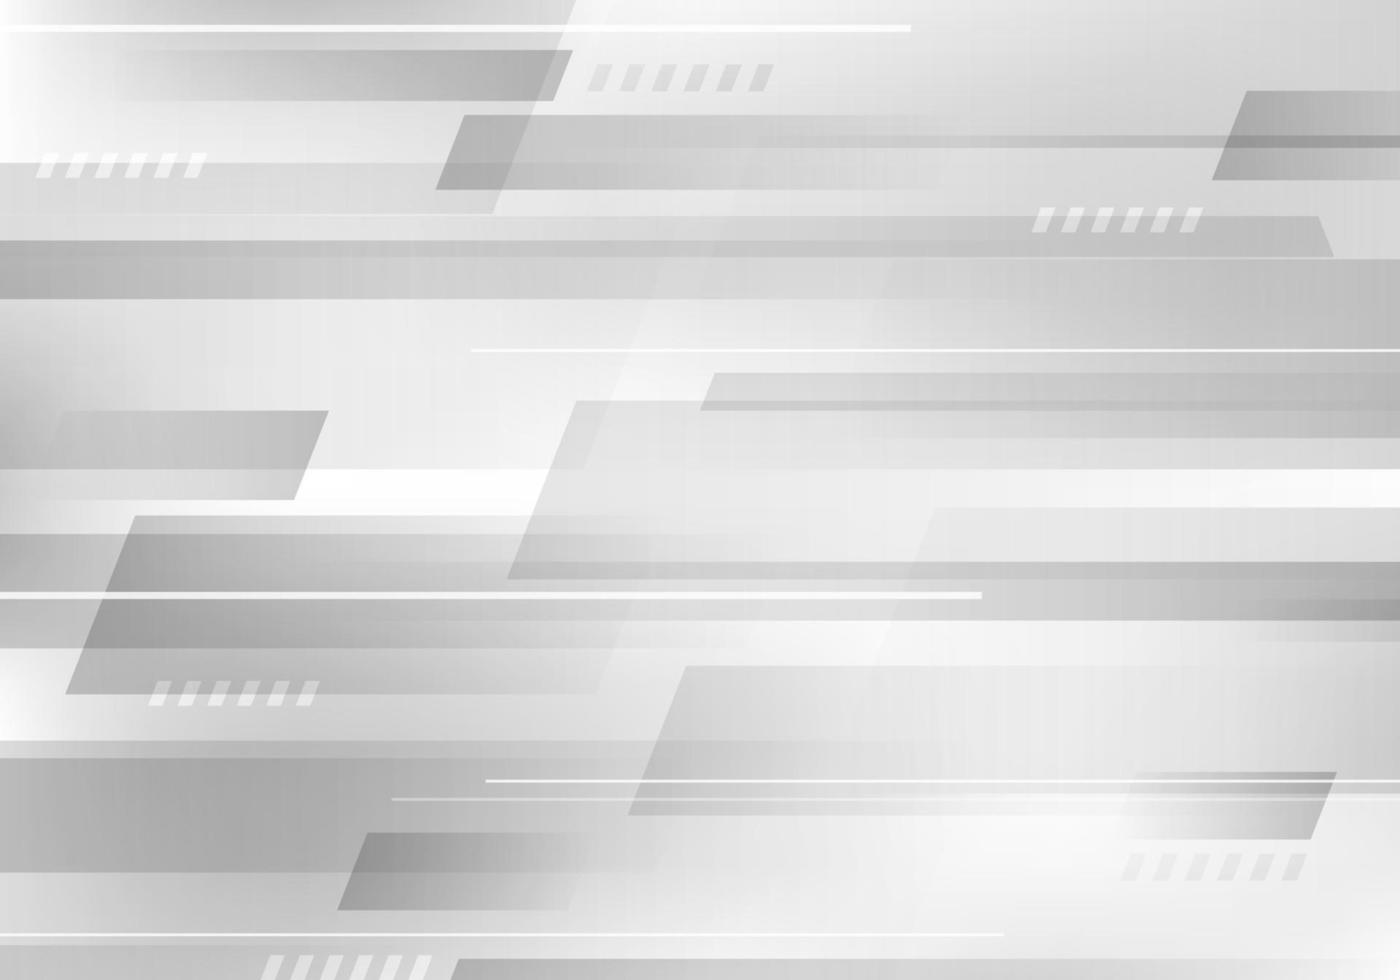 Abstract geometric white and gray color overlapping background technology corporate design concept vector